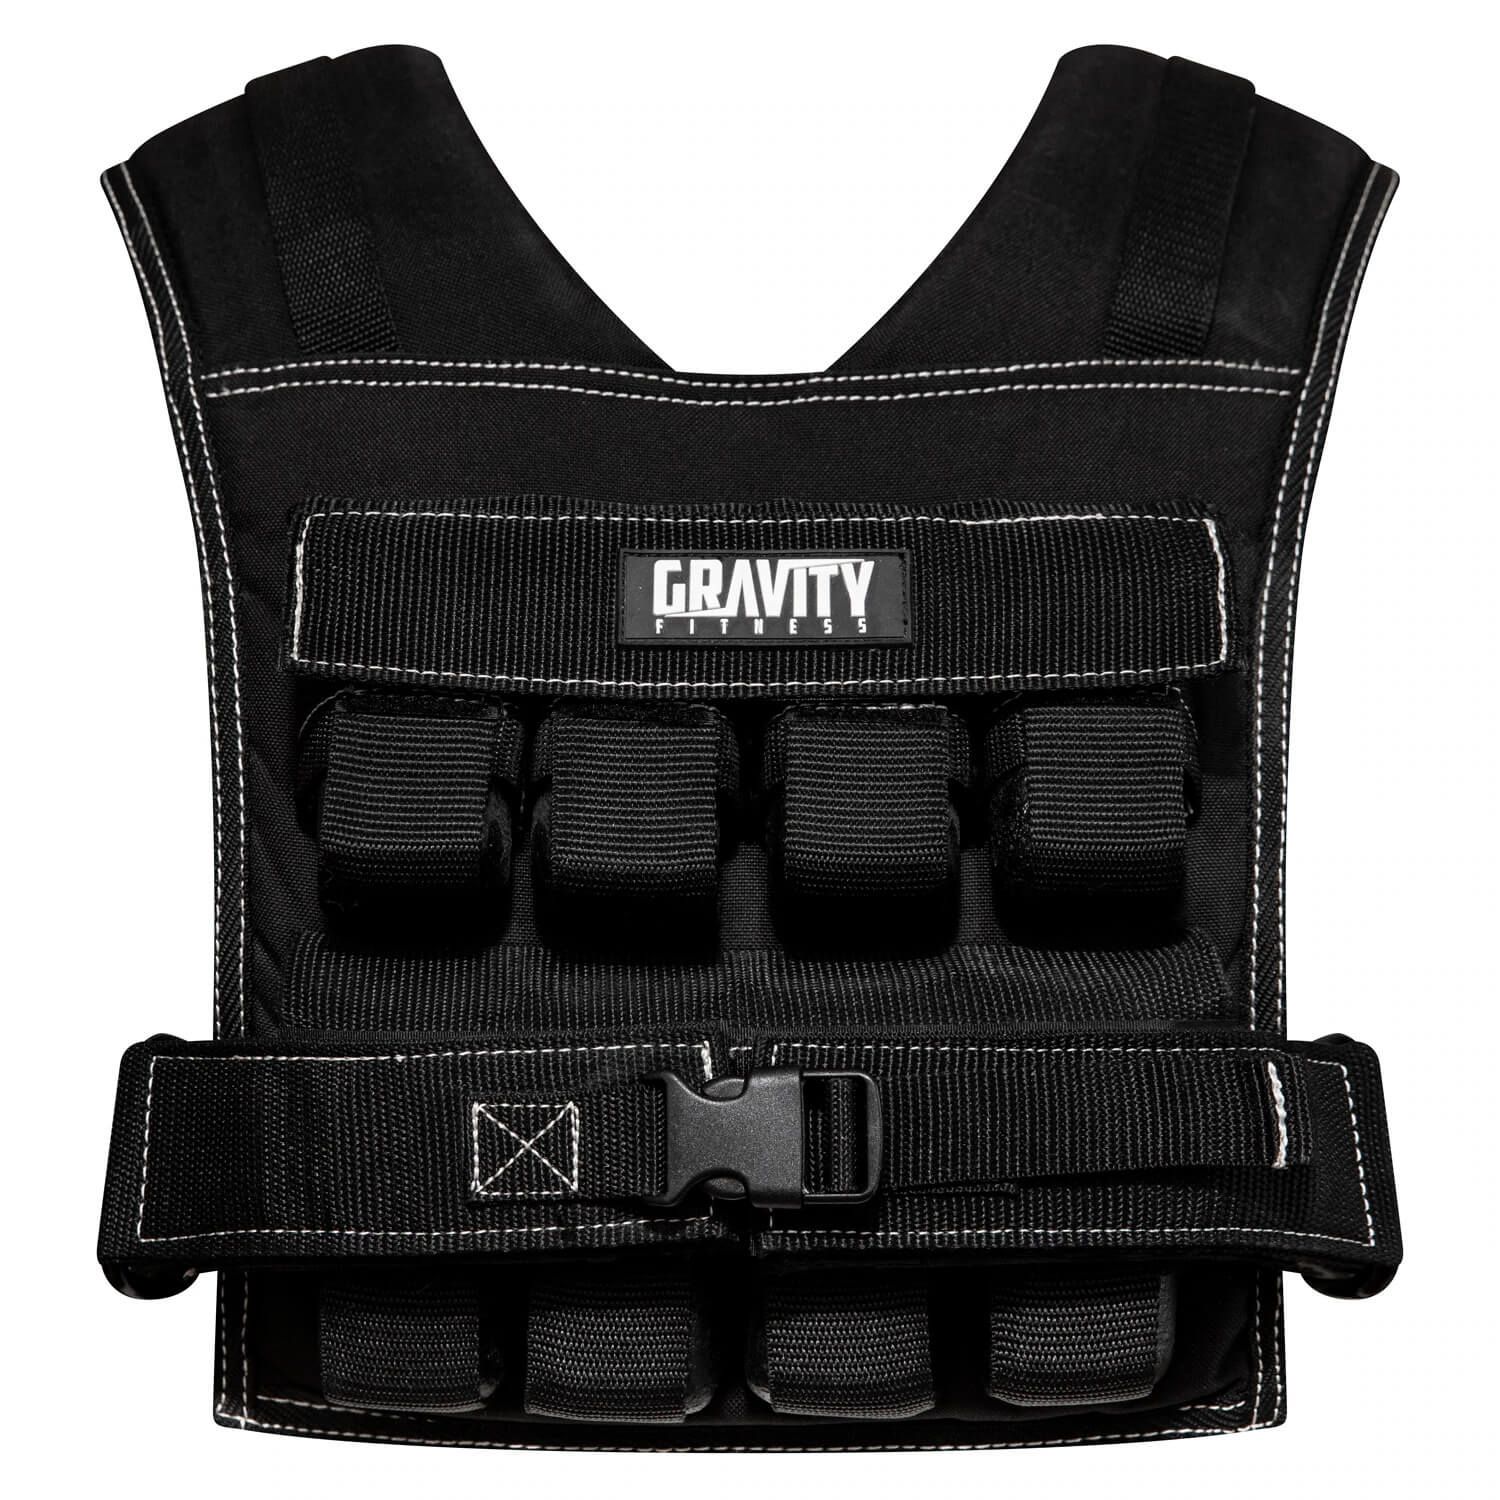 not Included Weighted VEST Jacket Fitness Running Strength Gym 9kg sand weights 